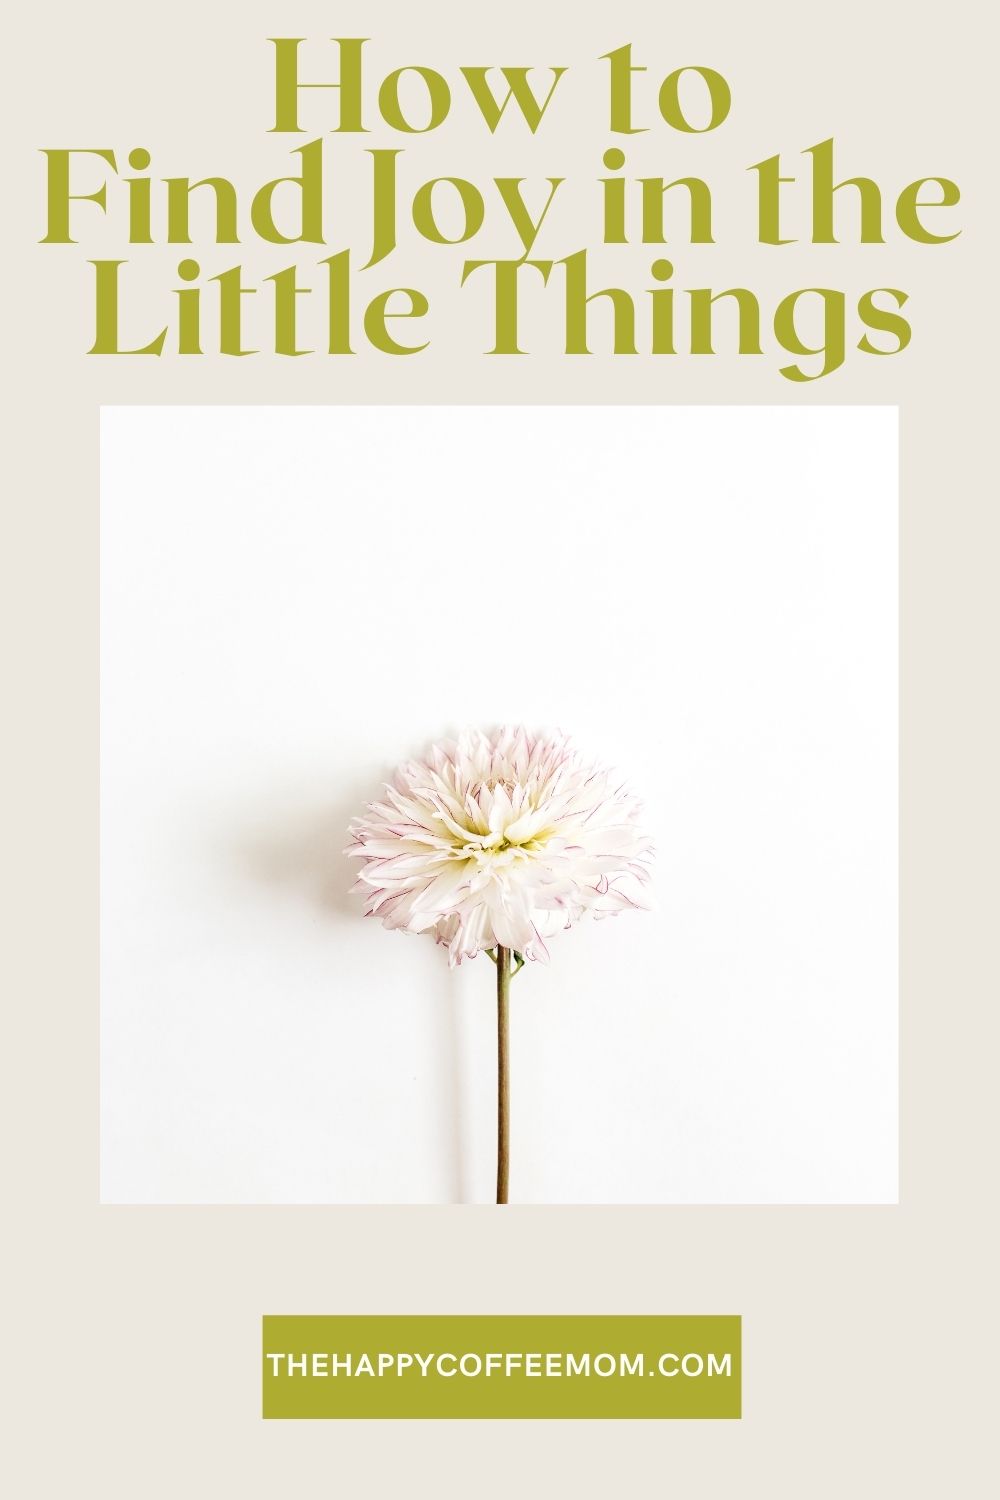 How to Find Joy in the Little Things in Life